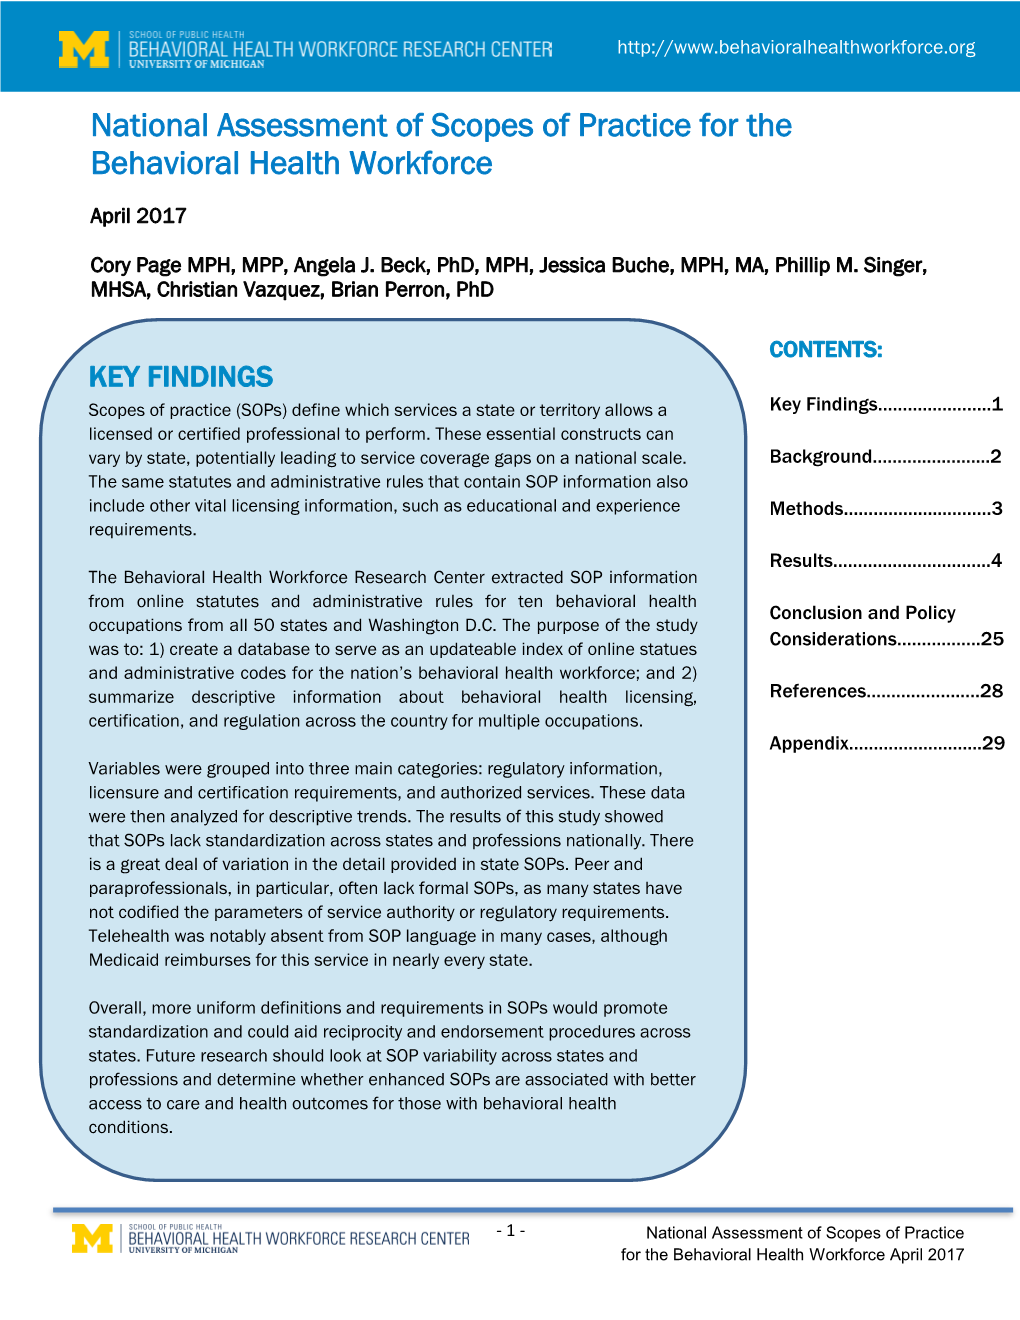 National Assessment of Scopes of Practice for the Behavioral Health Workforce